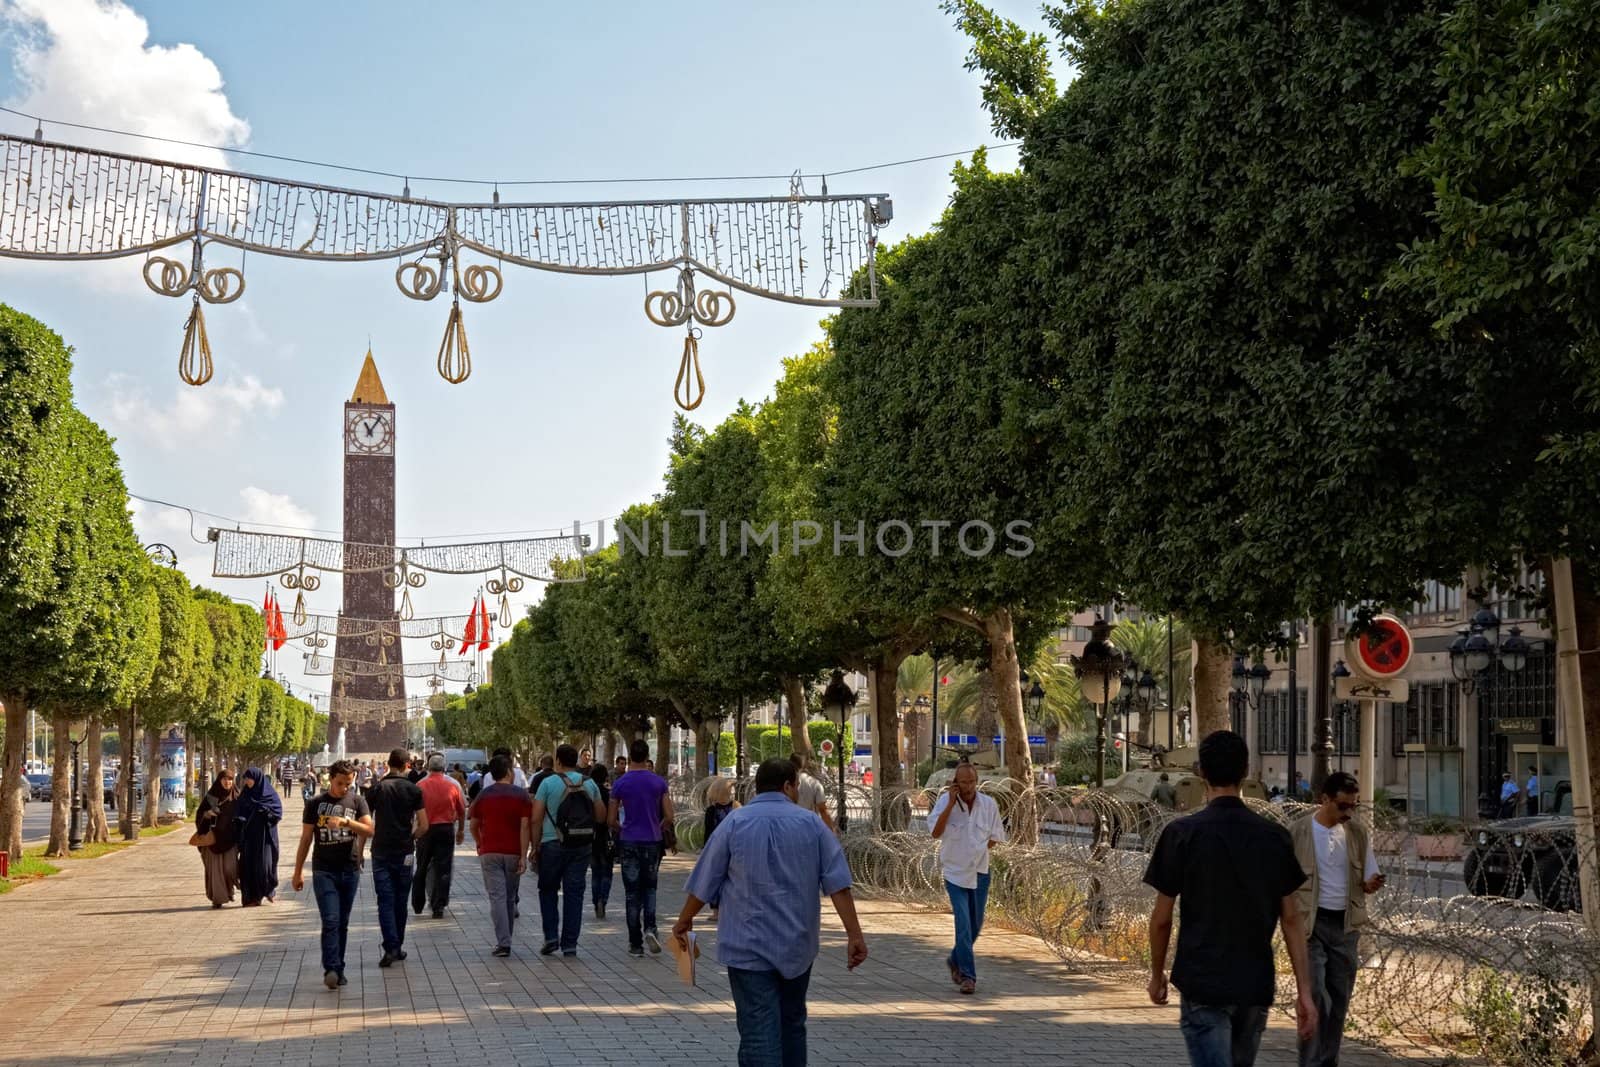 TUNIS, TUNISIA - OCTOBER 5: Barbed wire entanglement on Avenue Habib Bourguiba close to Monumental Clock on October 5 in Tunis. Higher security measures before the first election after Jasmine revolution.